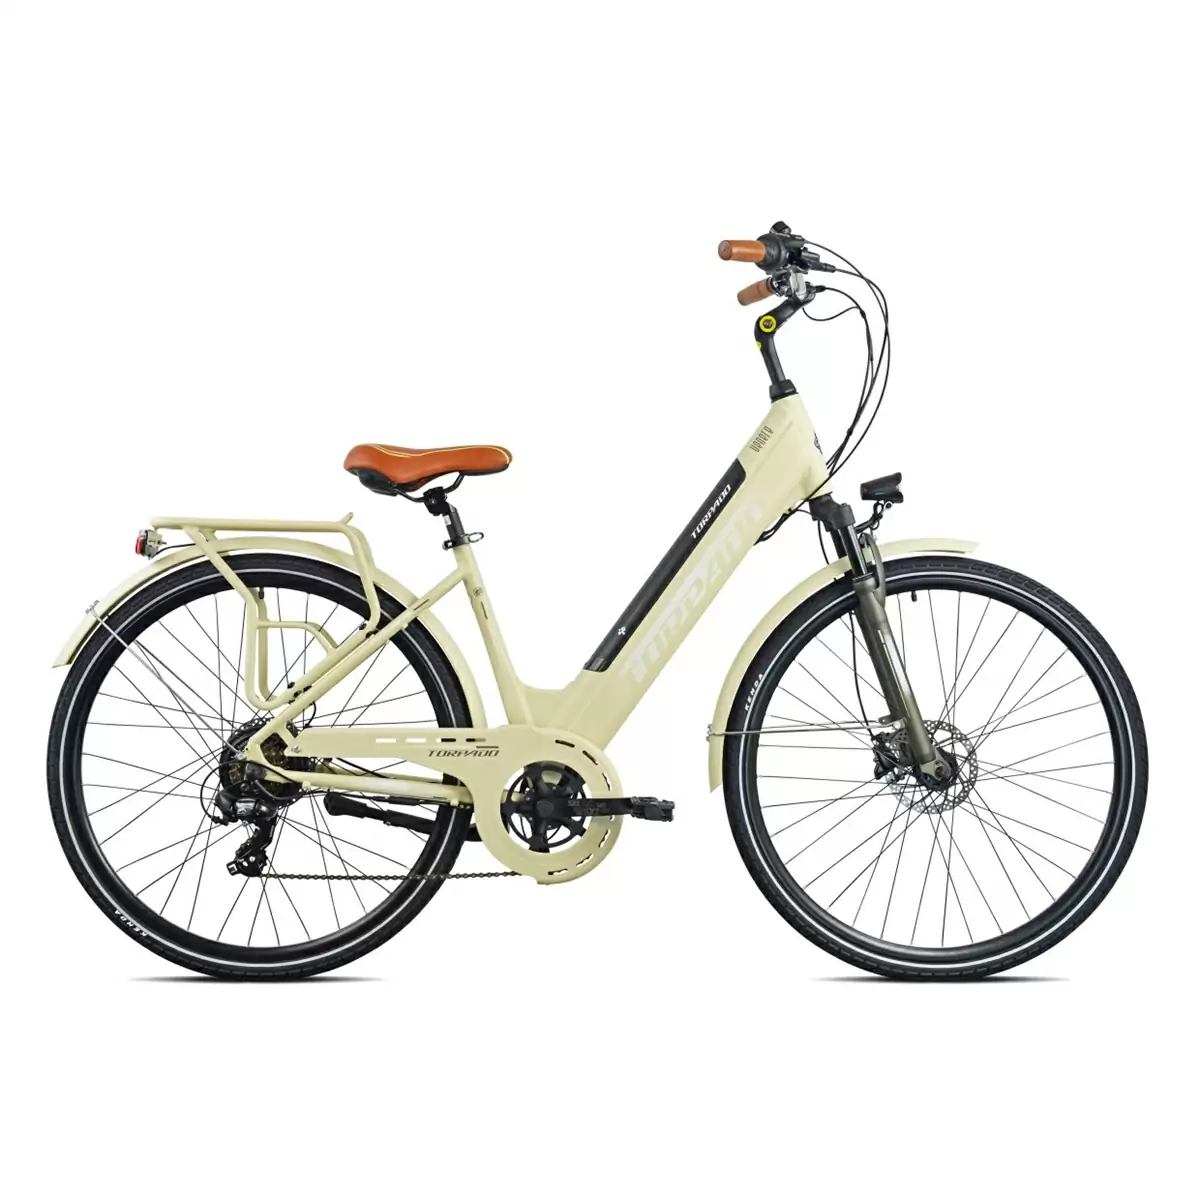 Venere T268 28'' 7s 468Wh Bafang White One Size - image